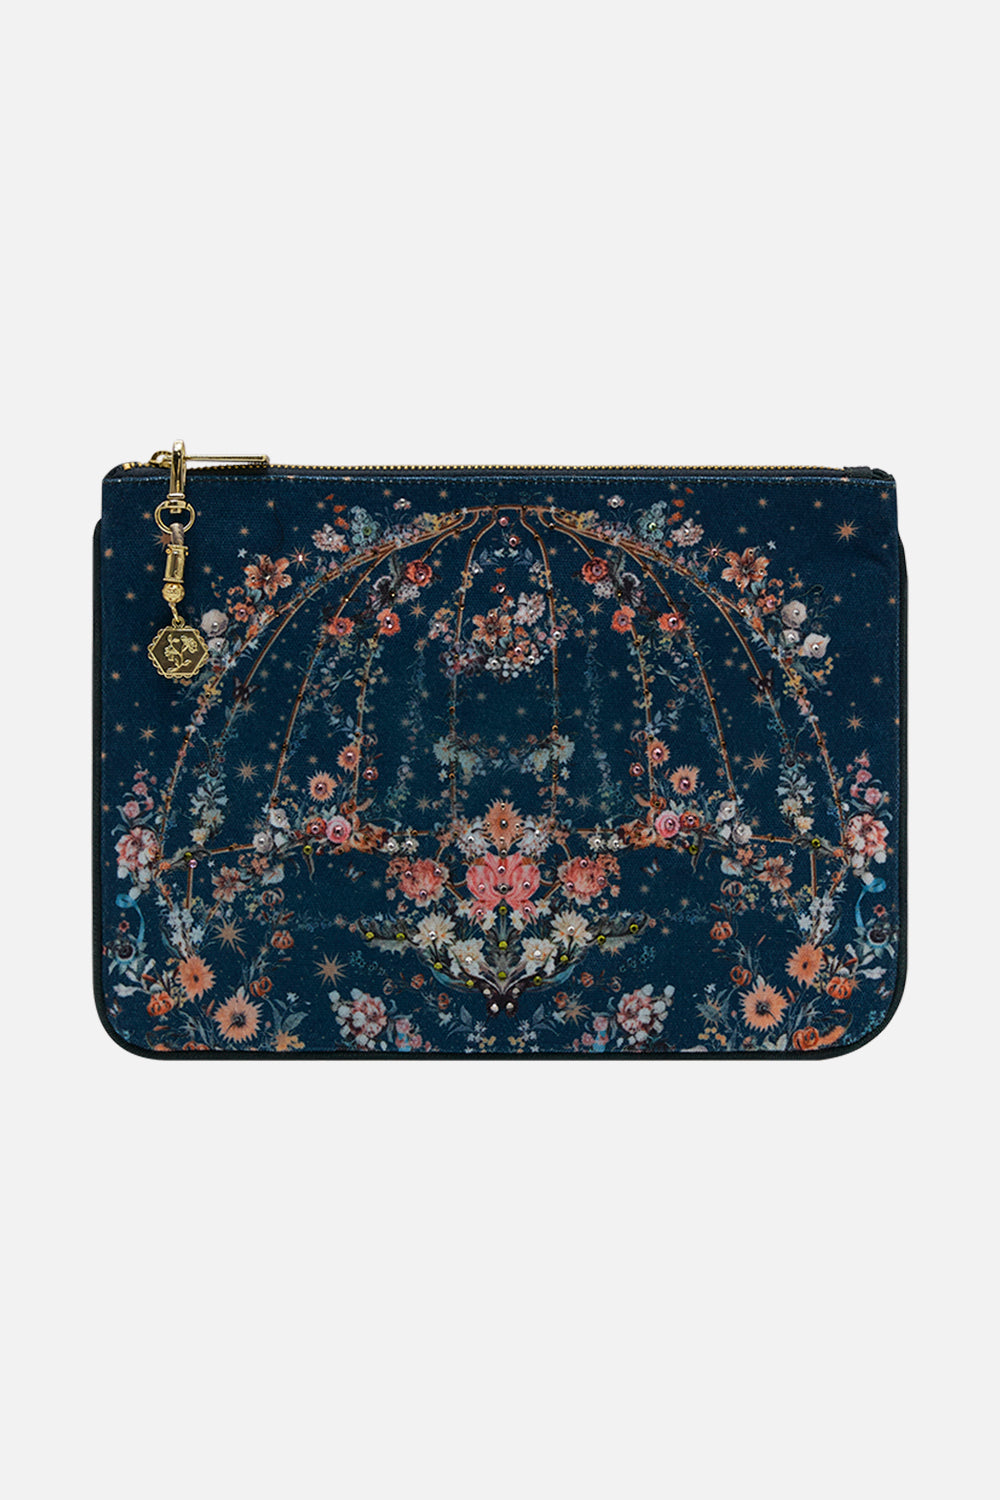 CAMILLA clutch bag in She Who Wears The Crown print